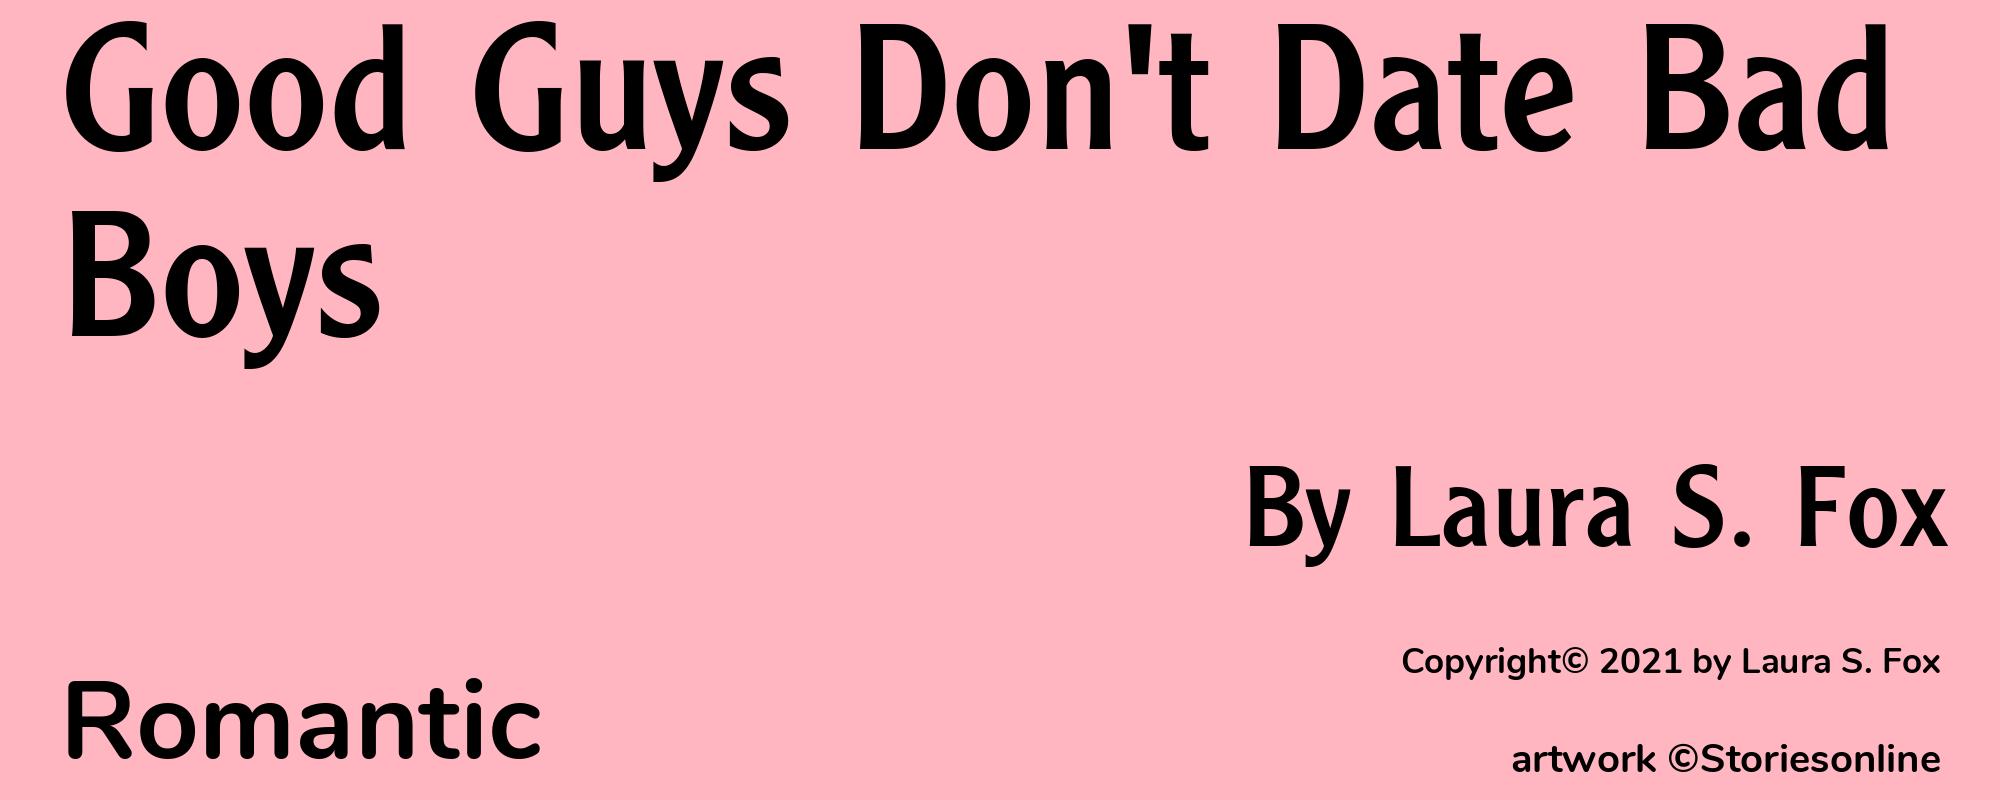 Good Guys Don't Date Bad Boys - Cover